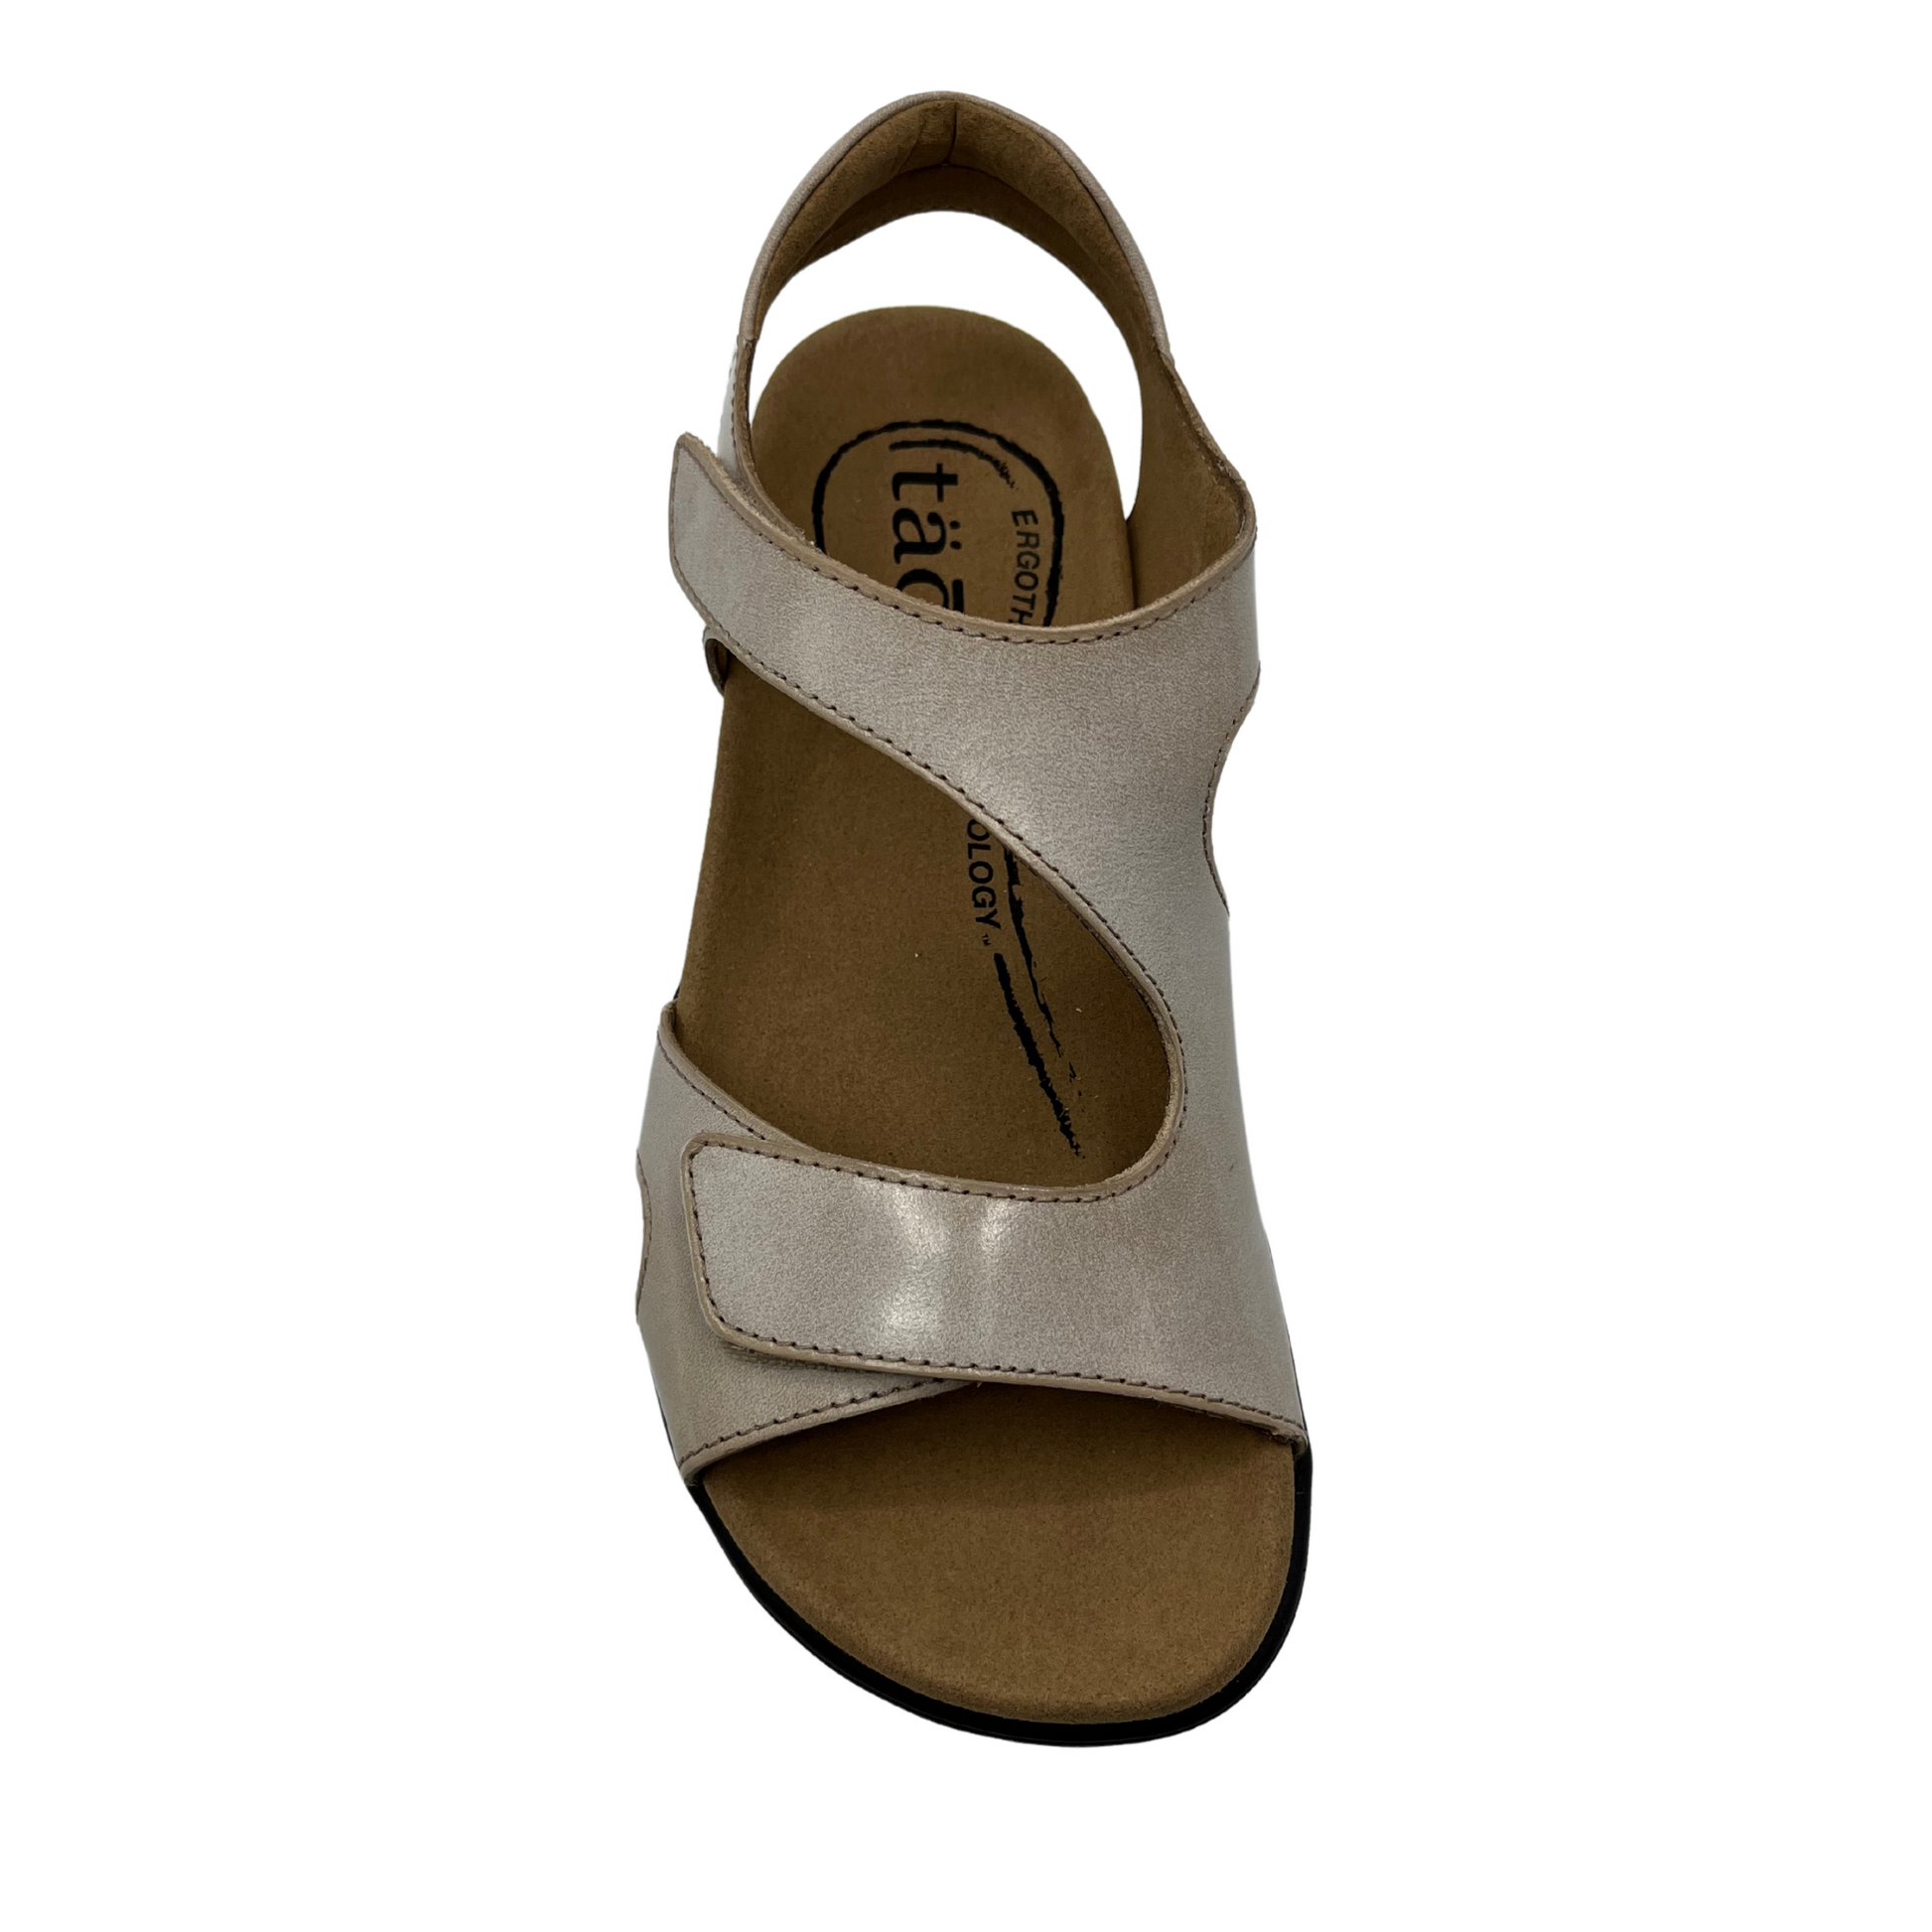 Top view of leather sandals with hook and loop closure straps, cushioned collar and leather lined footbed.